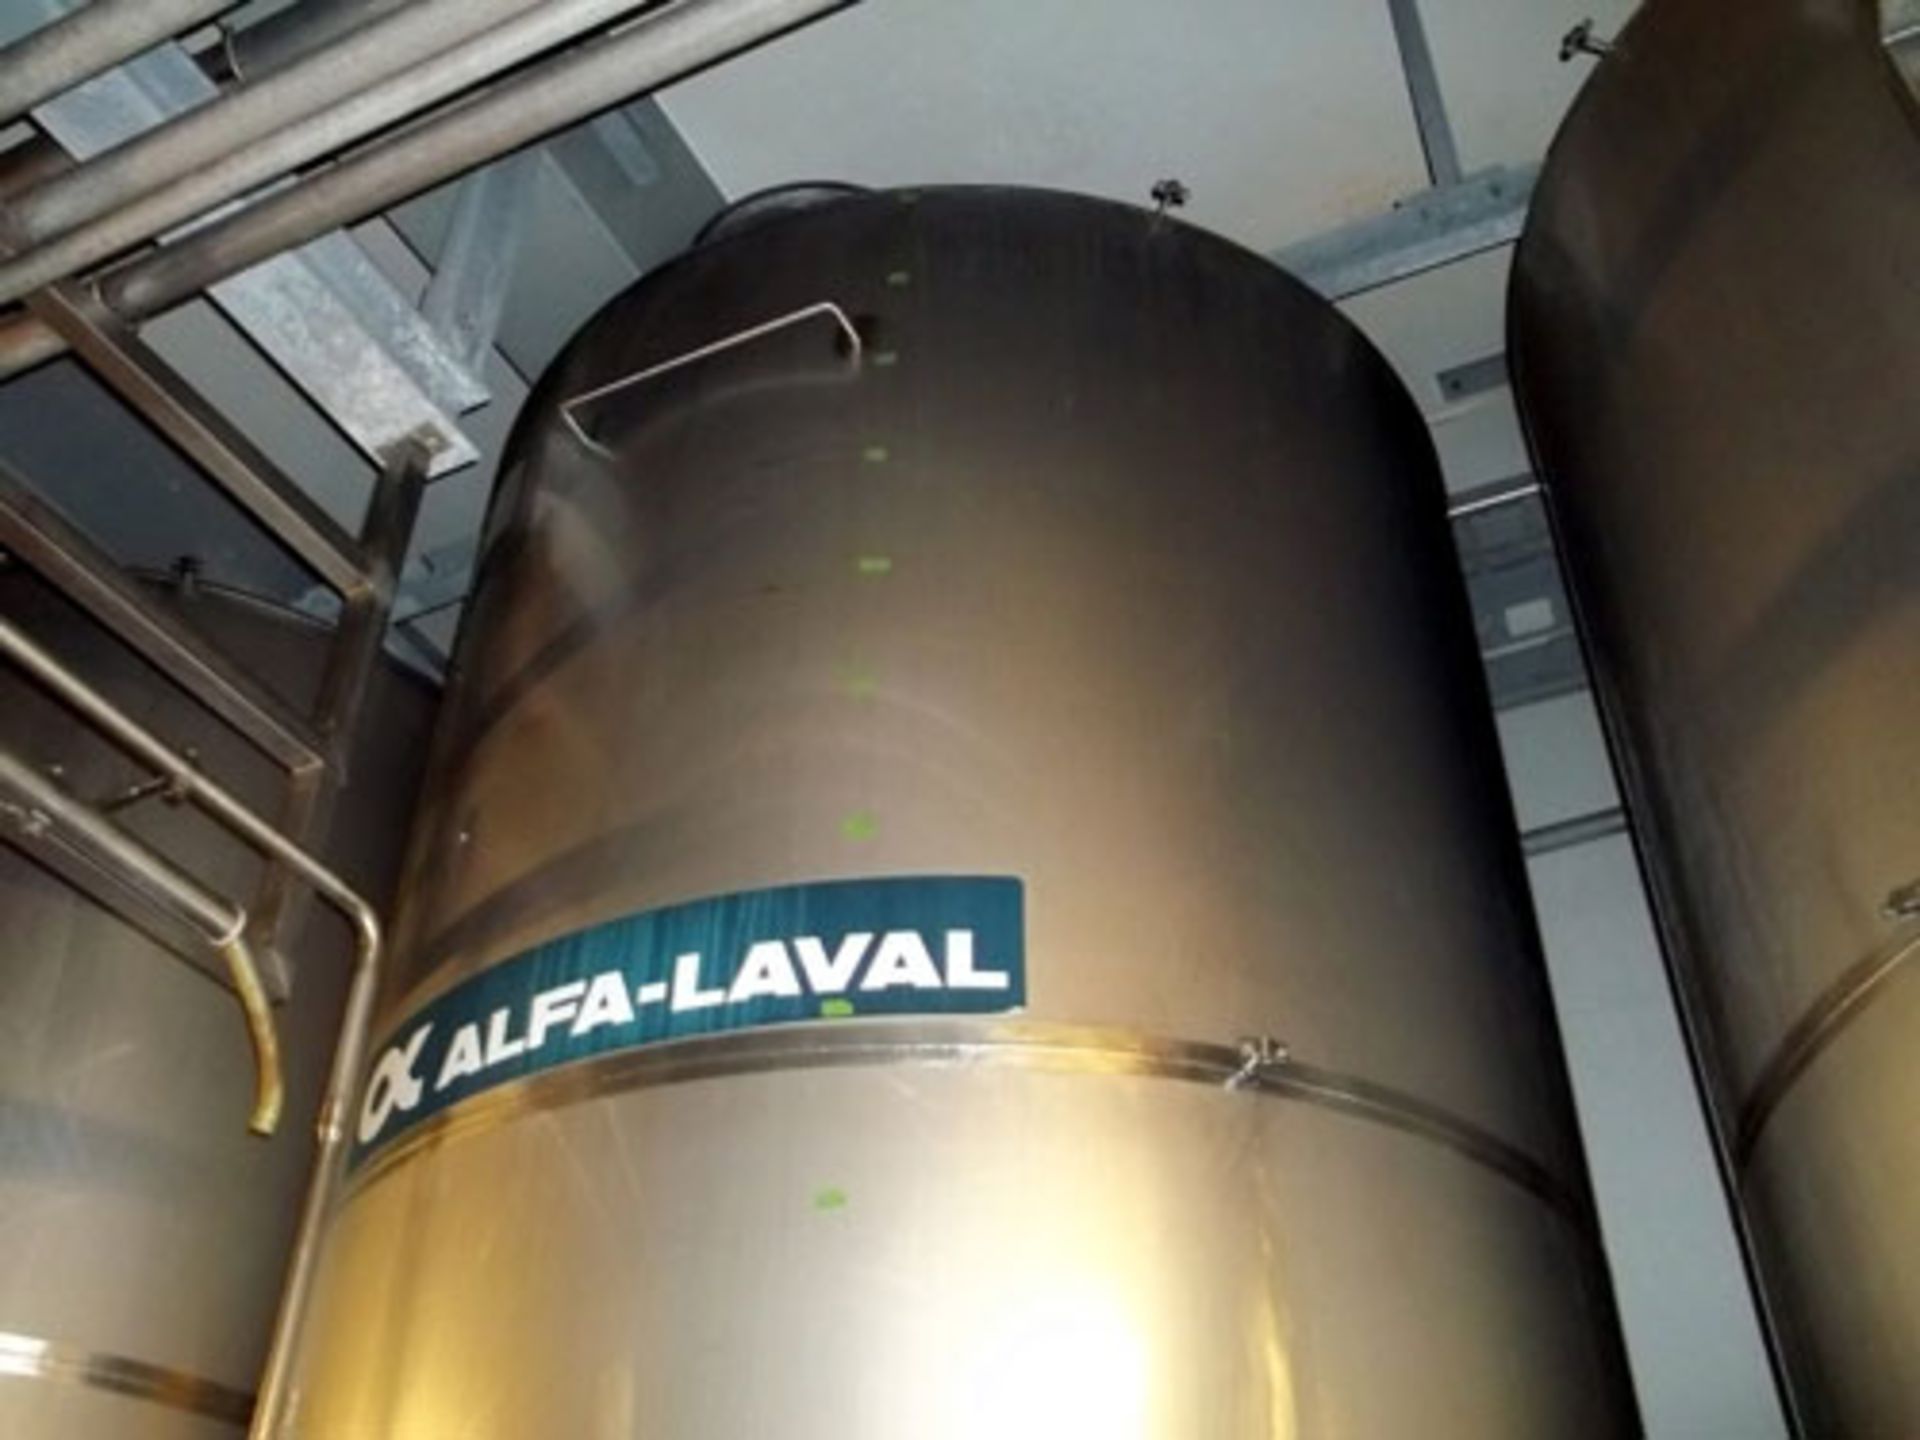 Alfa-Laval Tank, 10000 Liter (2641 Gallon), Type TV, Stainless Steel, Vertical. Coned bottom. - Image 2 of 4